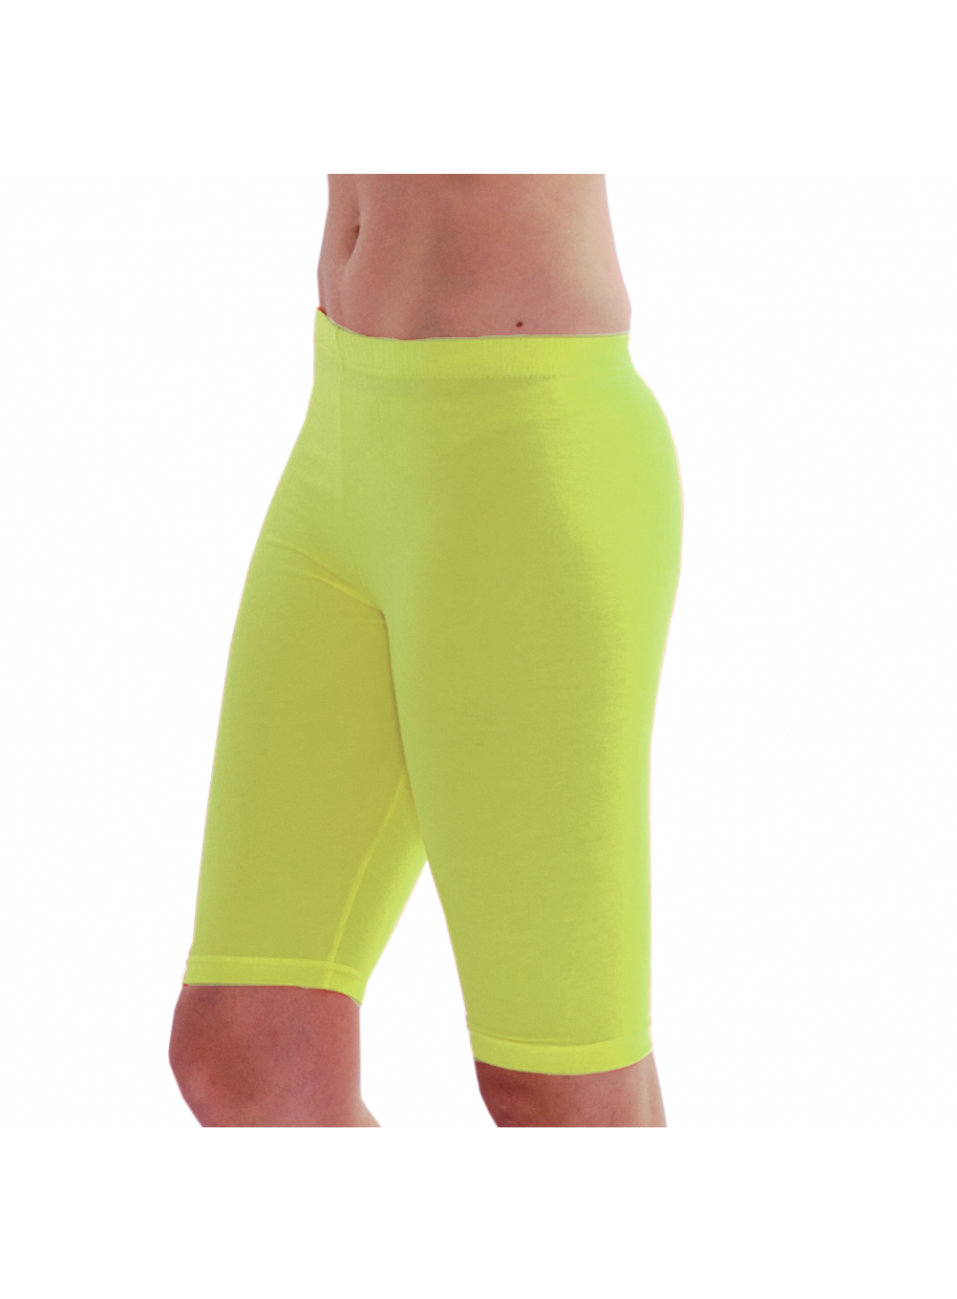 https://spictex.com/image/cache/catalog/products/ladies/women-shorties-lycra/women-tight-shortie-anis-spsh-01-957x1299w.png